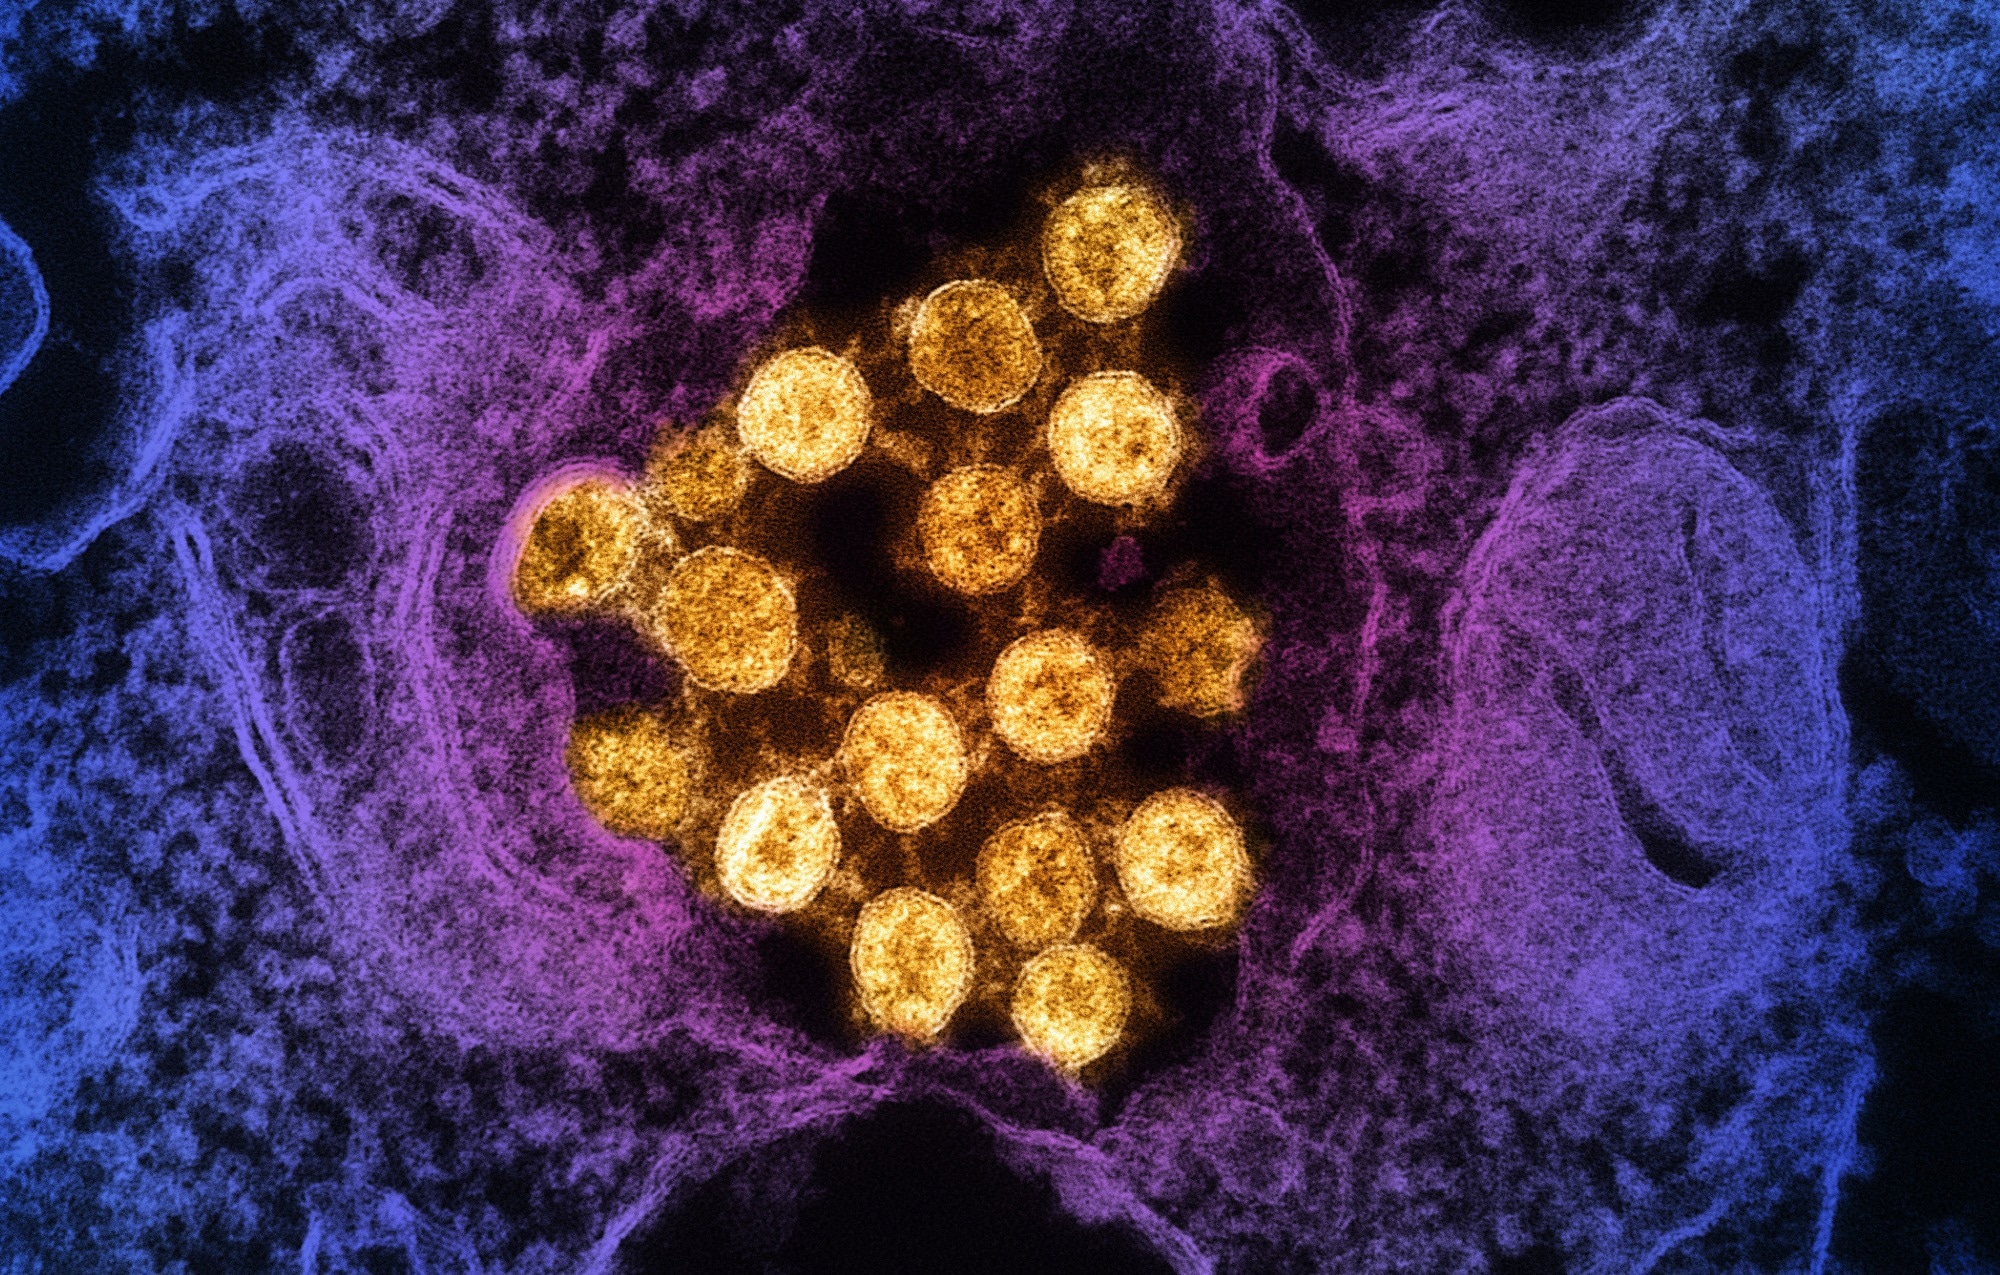 Study: Public Health Impact of Paxlovid as Treatment for COVID-19, United States. Transmission electron micrograph of SARS-CoV-2 virus particles (colorized gold), isolated from a patient sample. Image captured at the NIAID Integrated Research Facility (IRF) in Fort Detrick, Maryland. Image Credit: NIAID